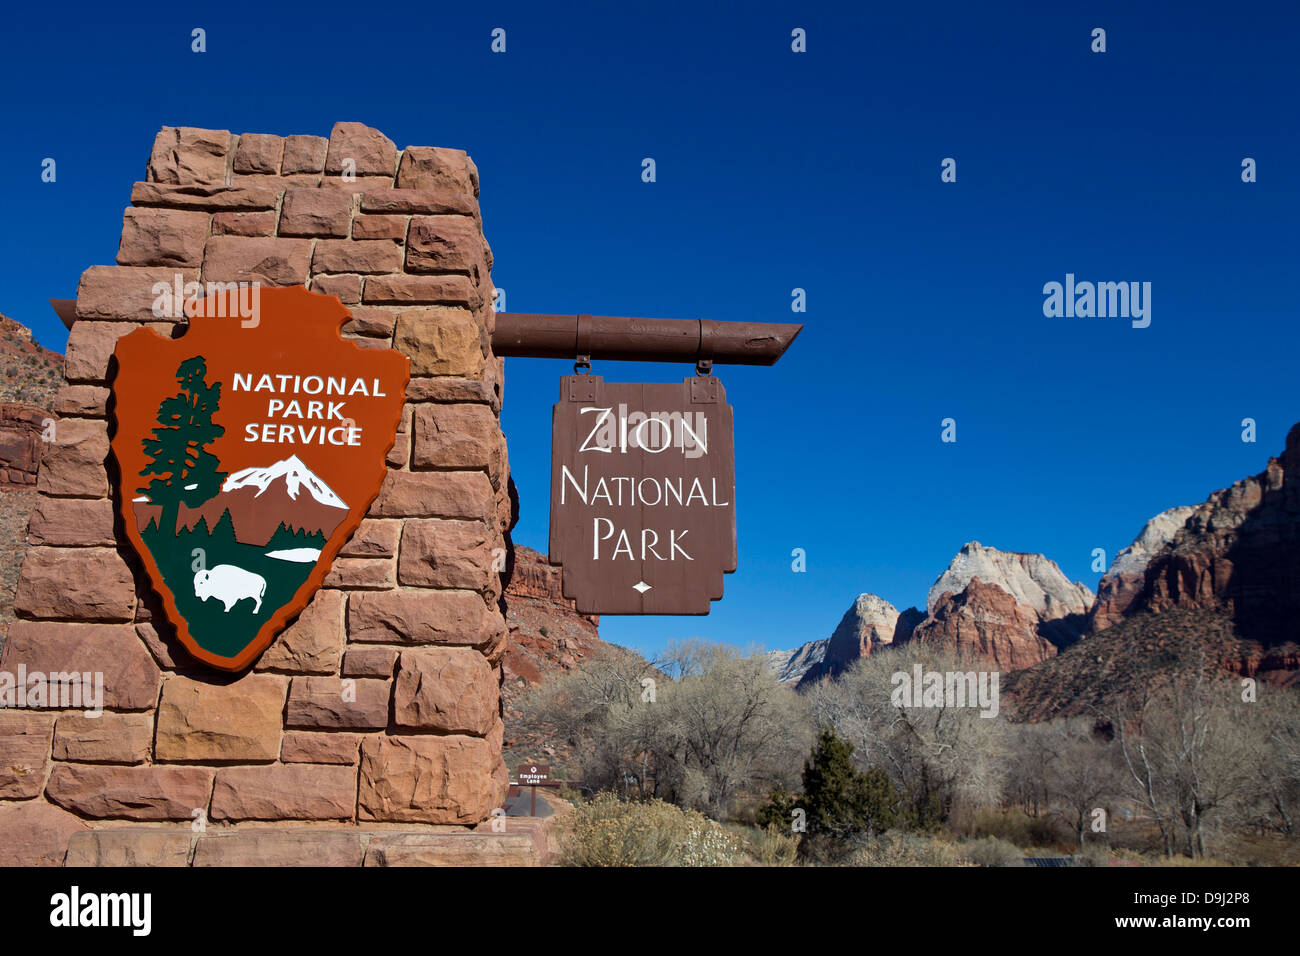 National Park Service welcome sign, entrance of Zion National Park, Utah, United States of America Stock Photo